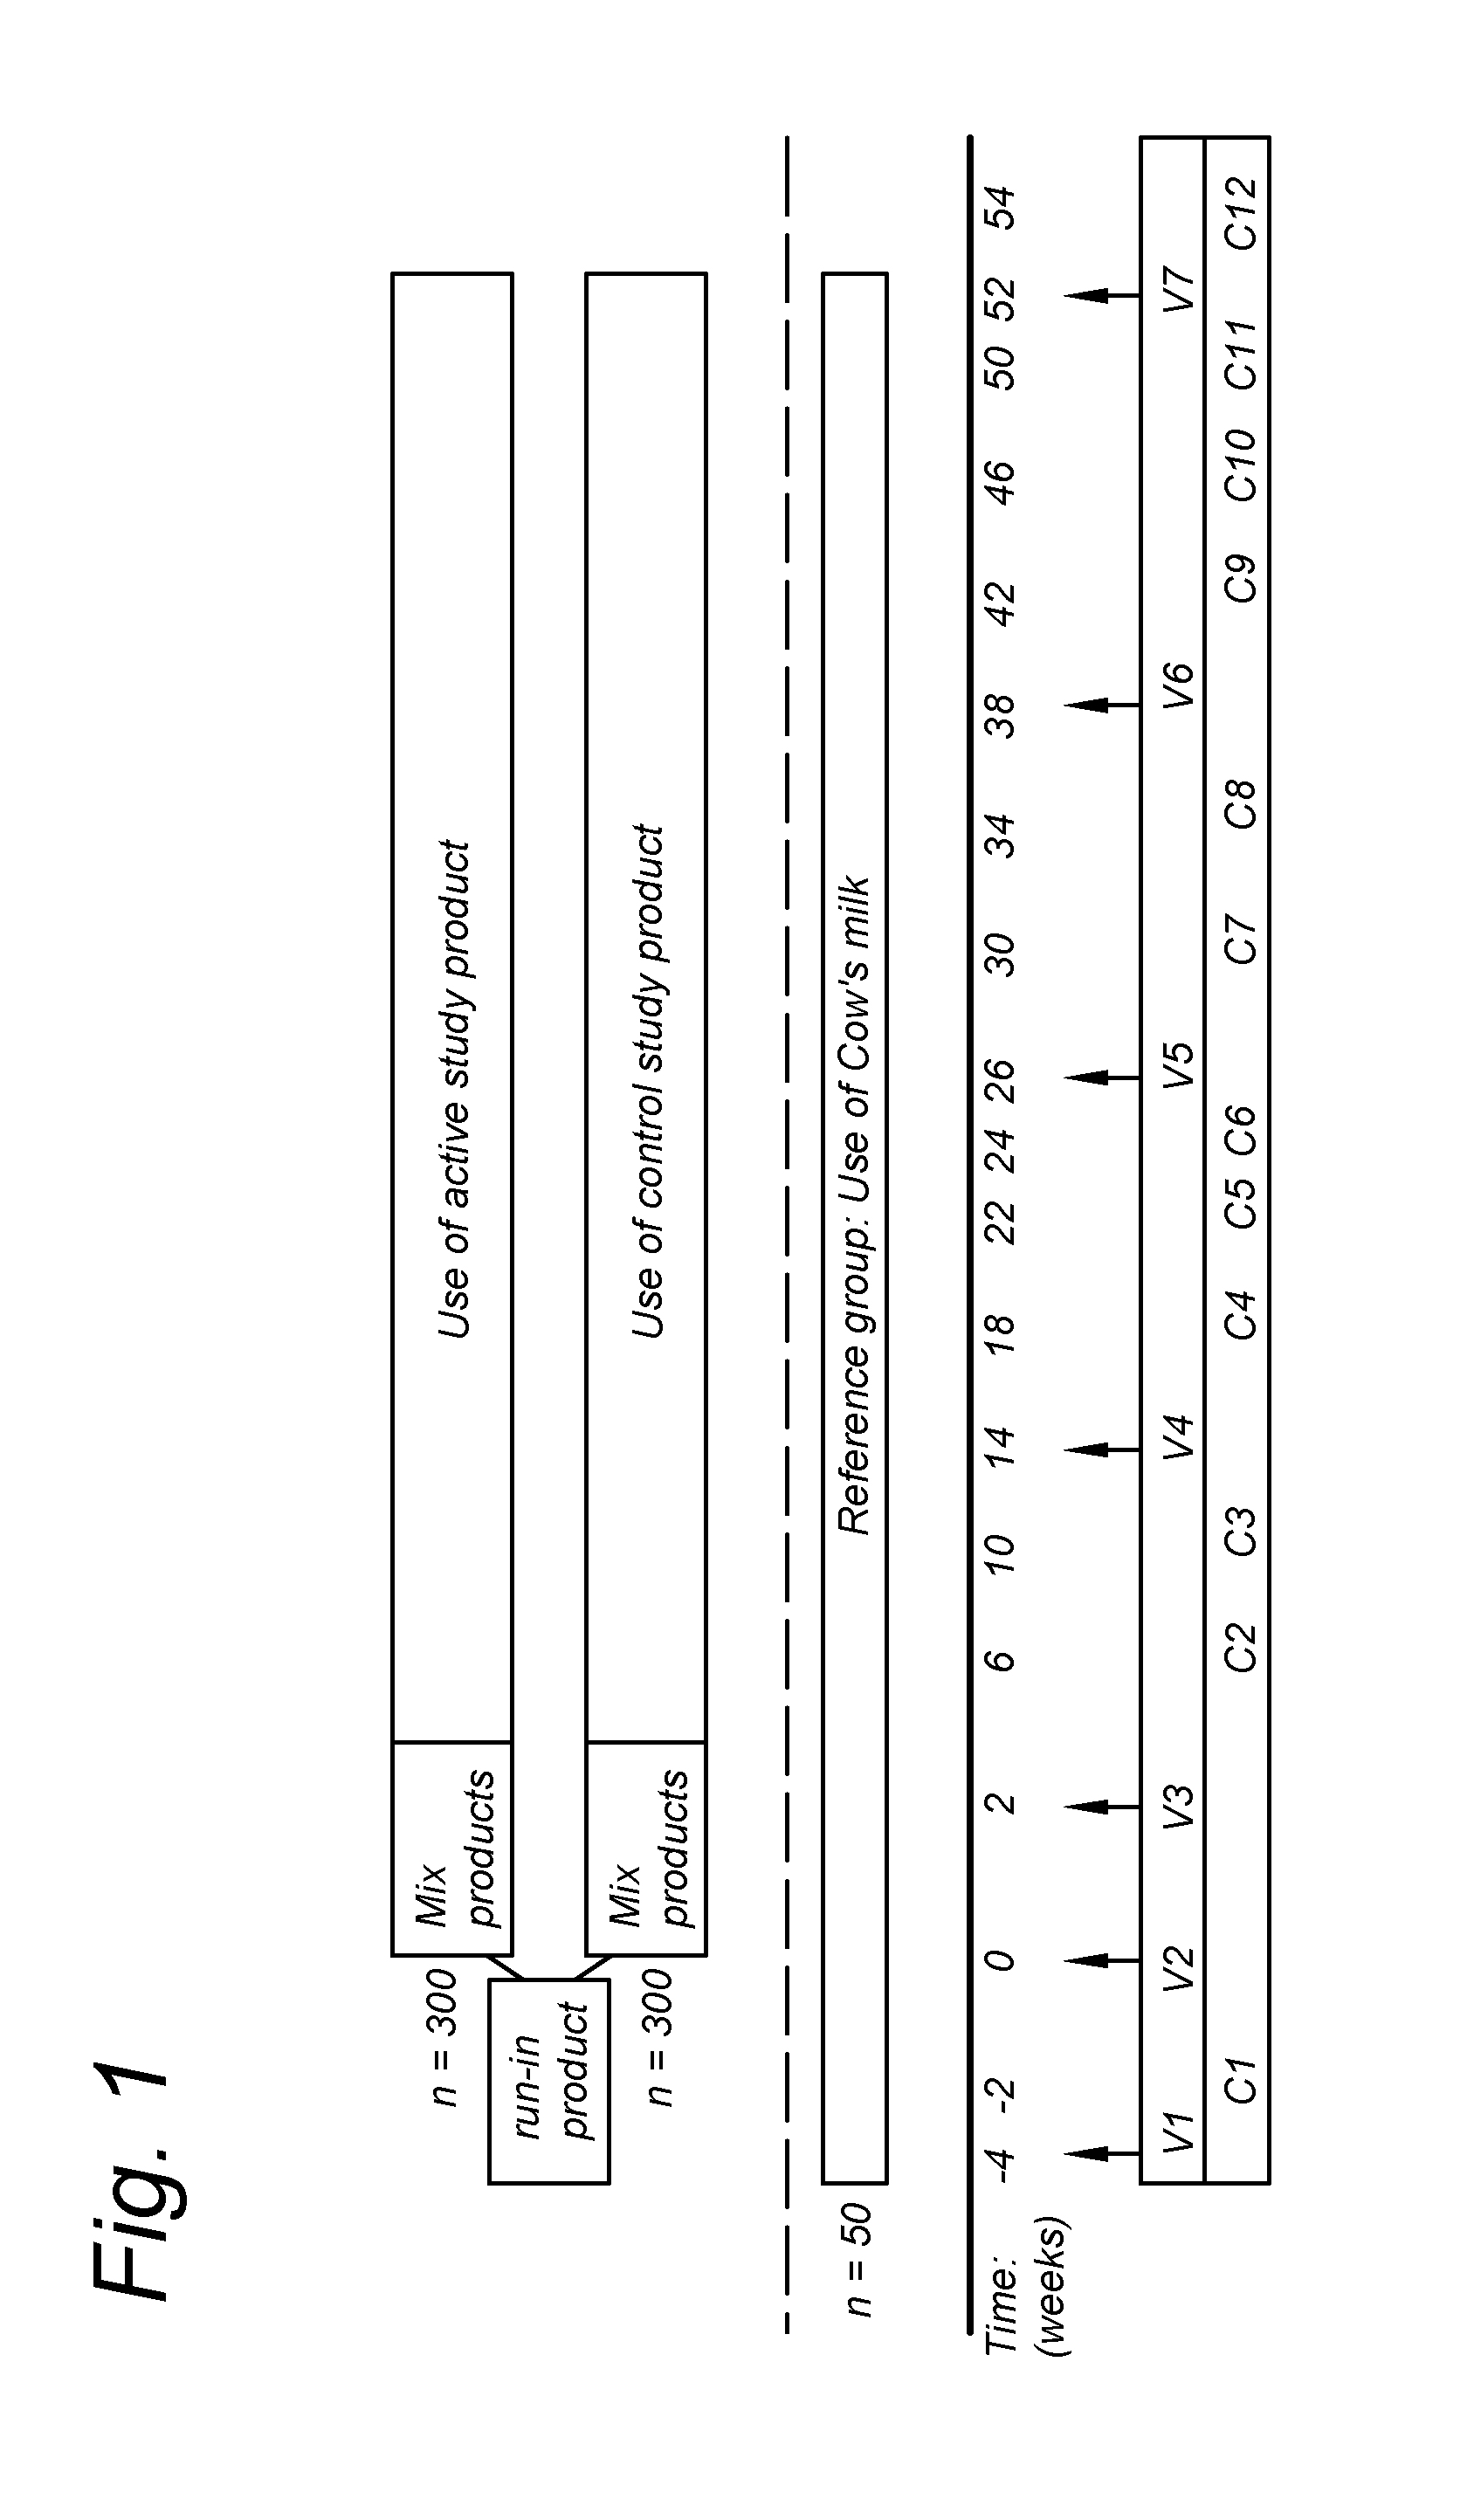 Method for reducing the occurrence of infection in young children